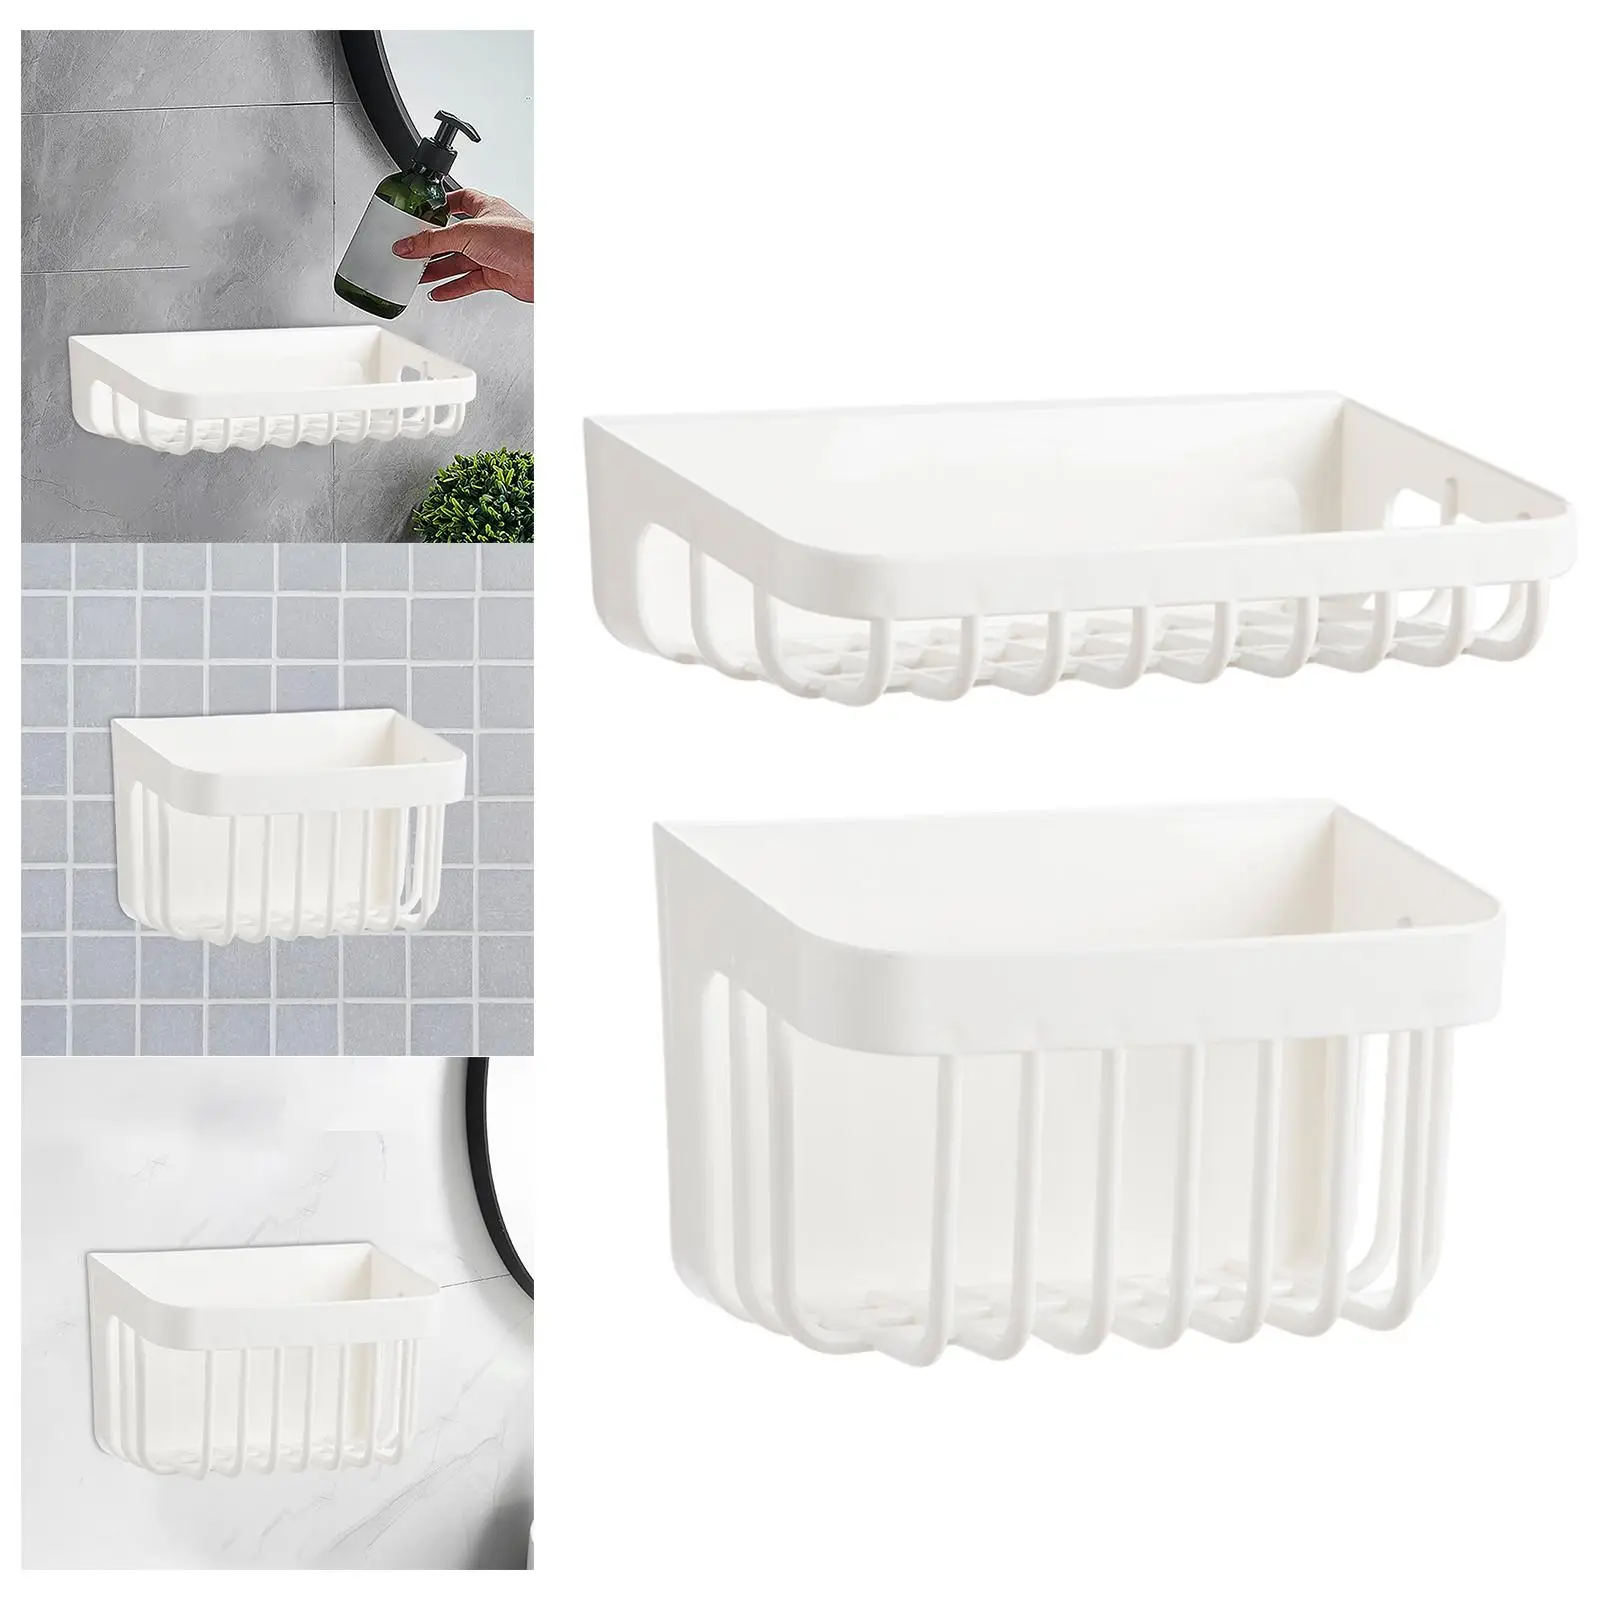 Shower Organizer Free Punching Bathroom Storage Rack for Small Places Dorm